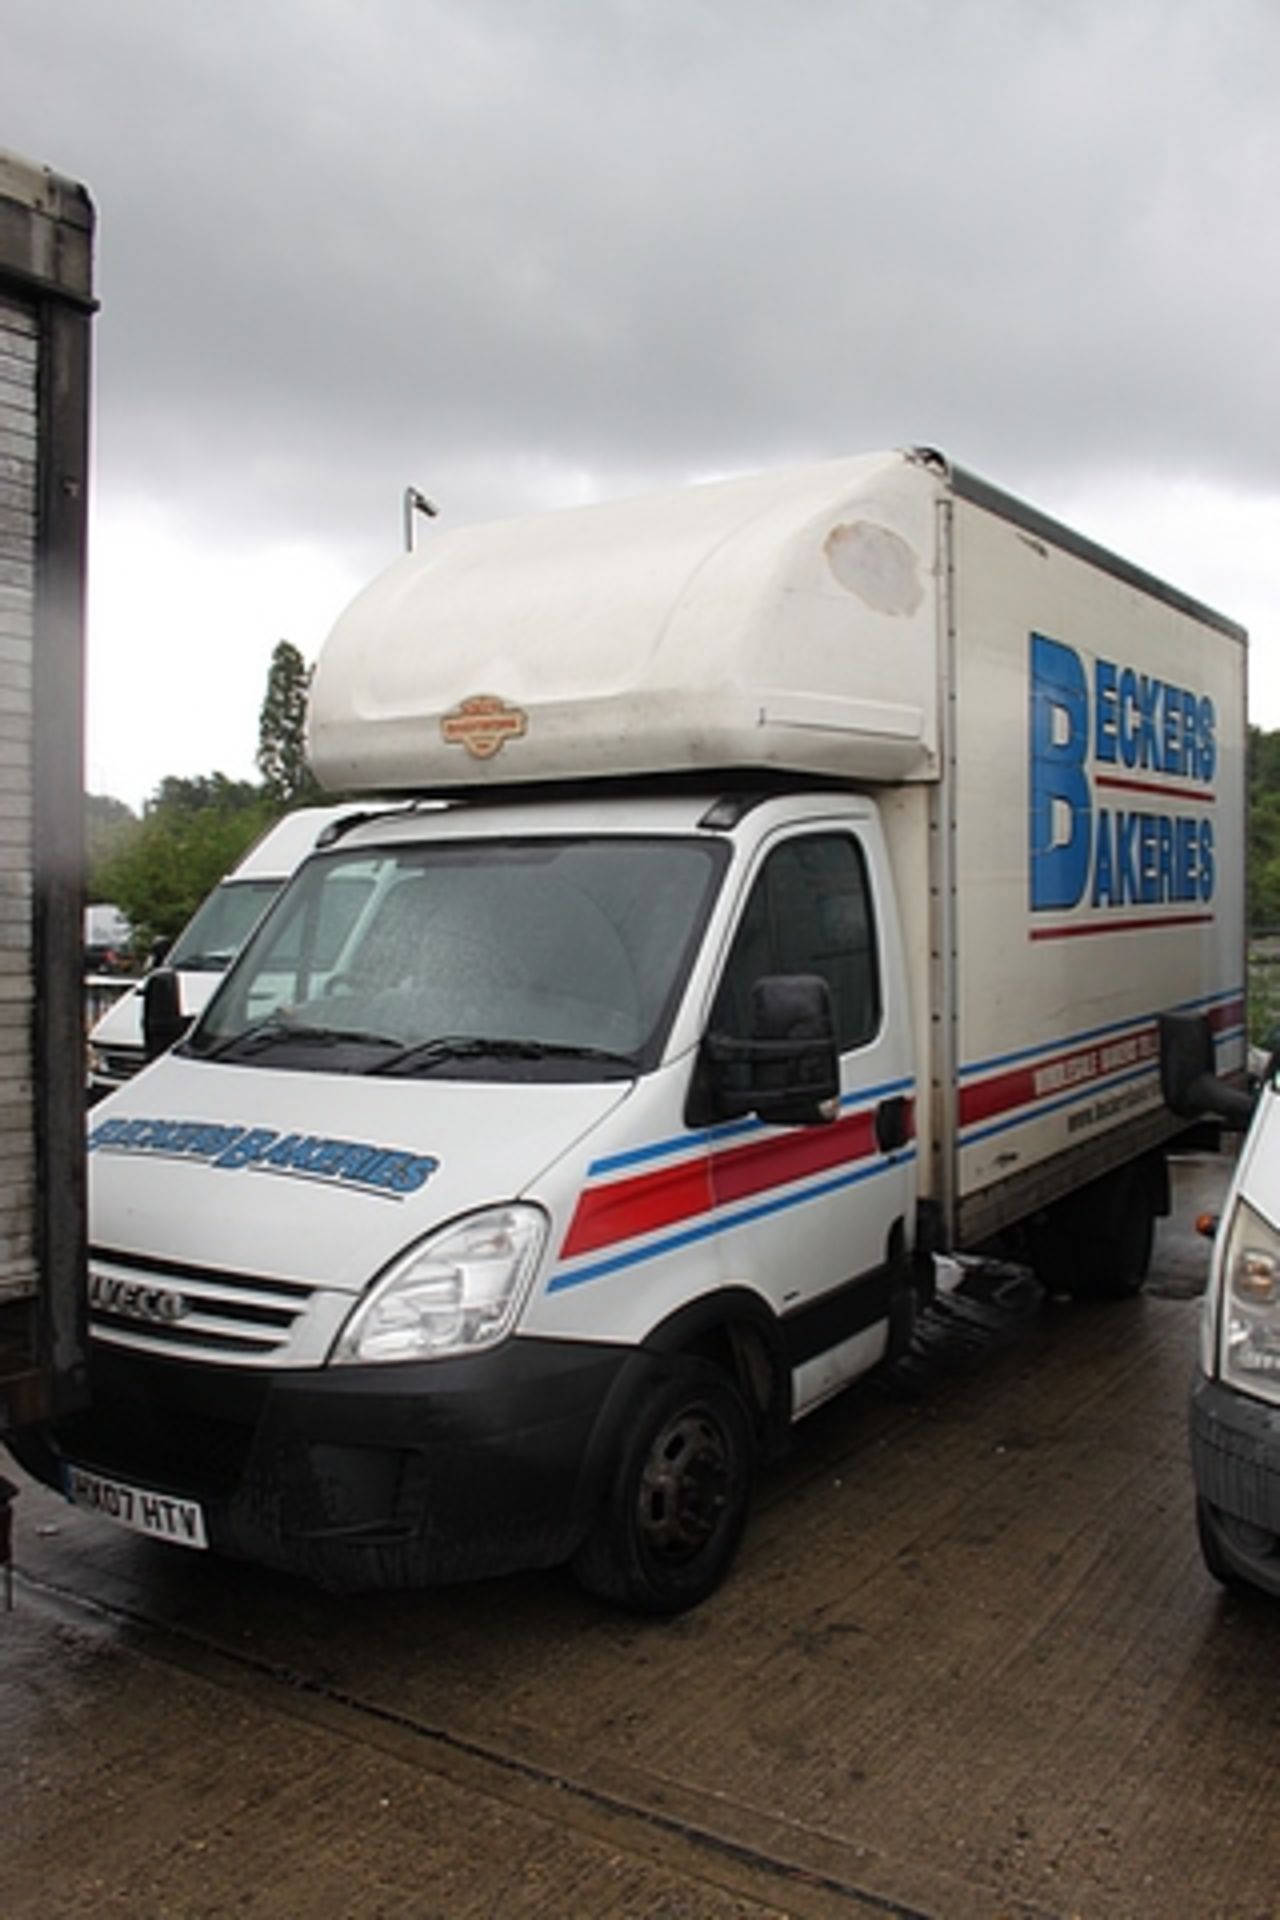 IVECO Daily 35C12 2.3 hips Index HX07 HTV Mileage 286,000 New engine and turbo fitted recently - Image 2 of 2